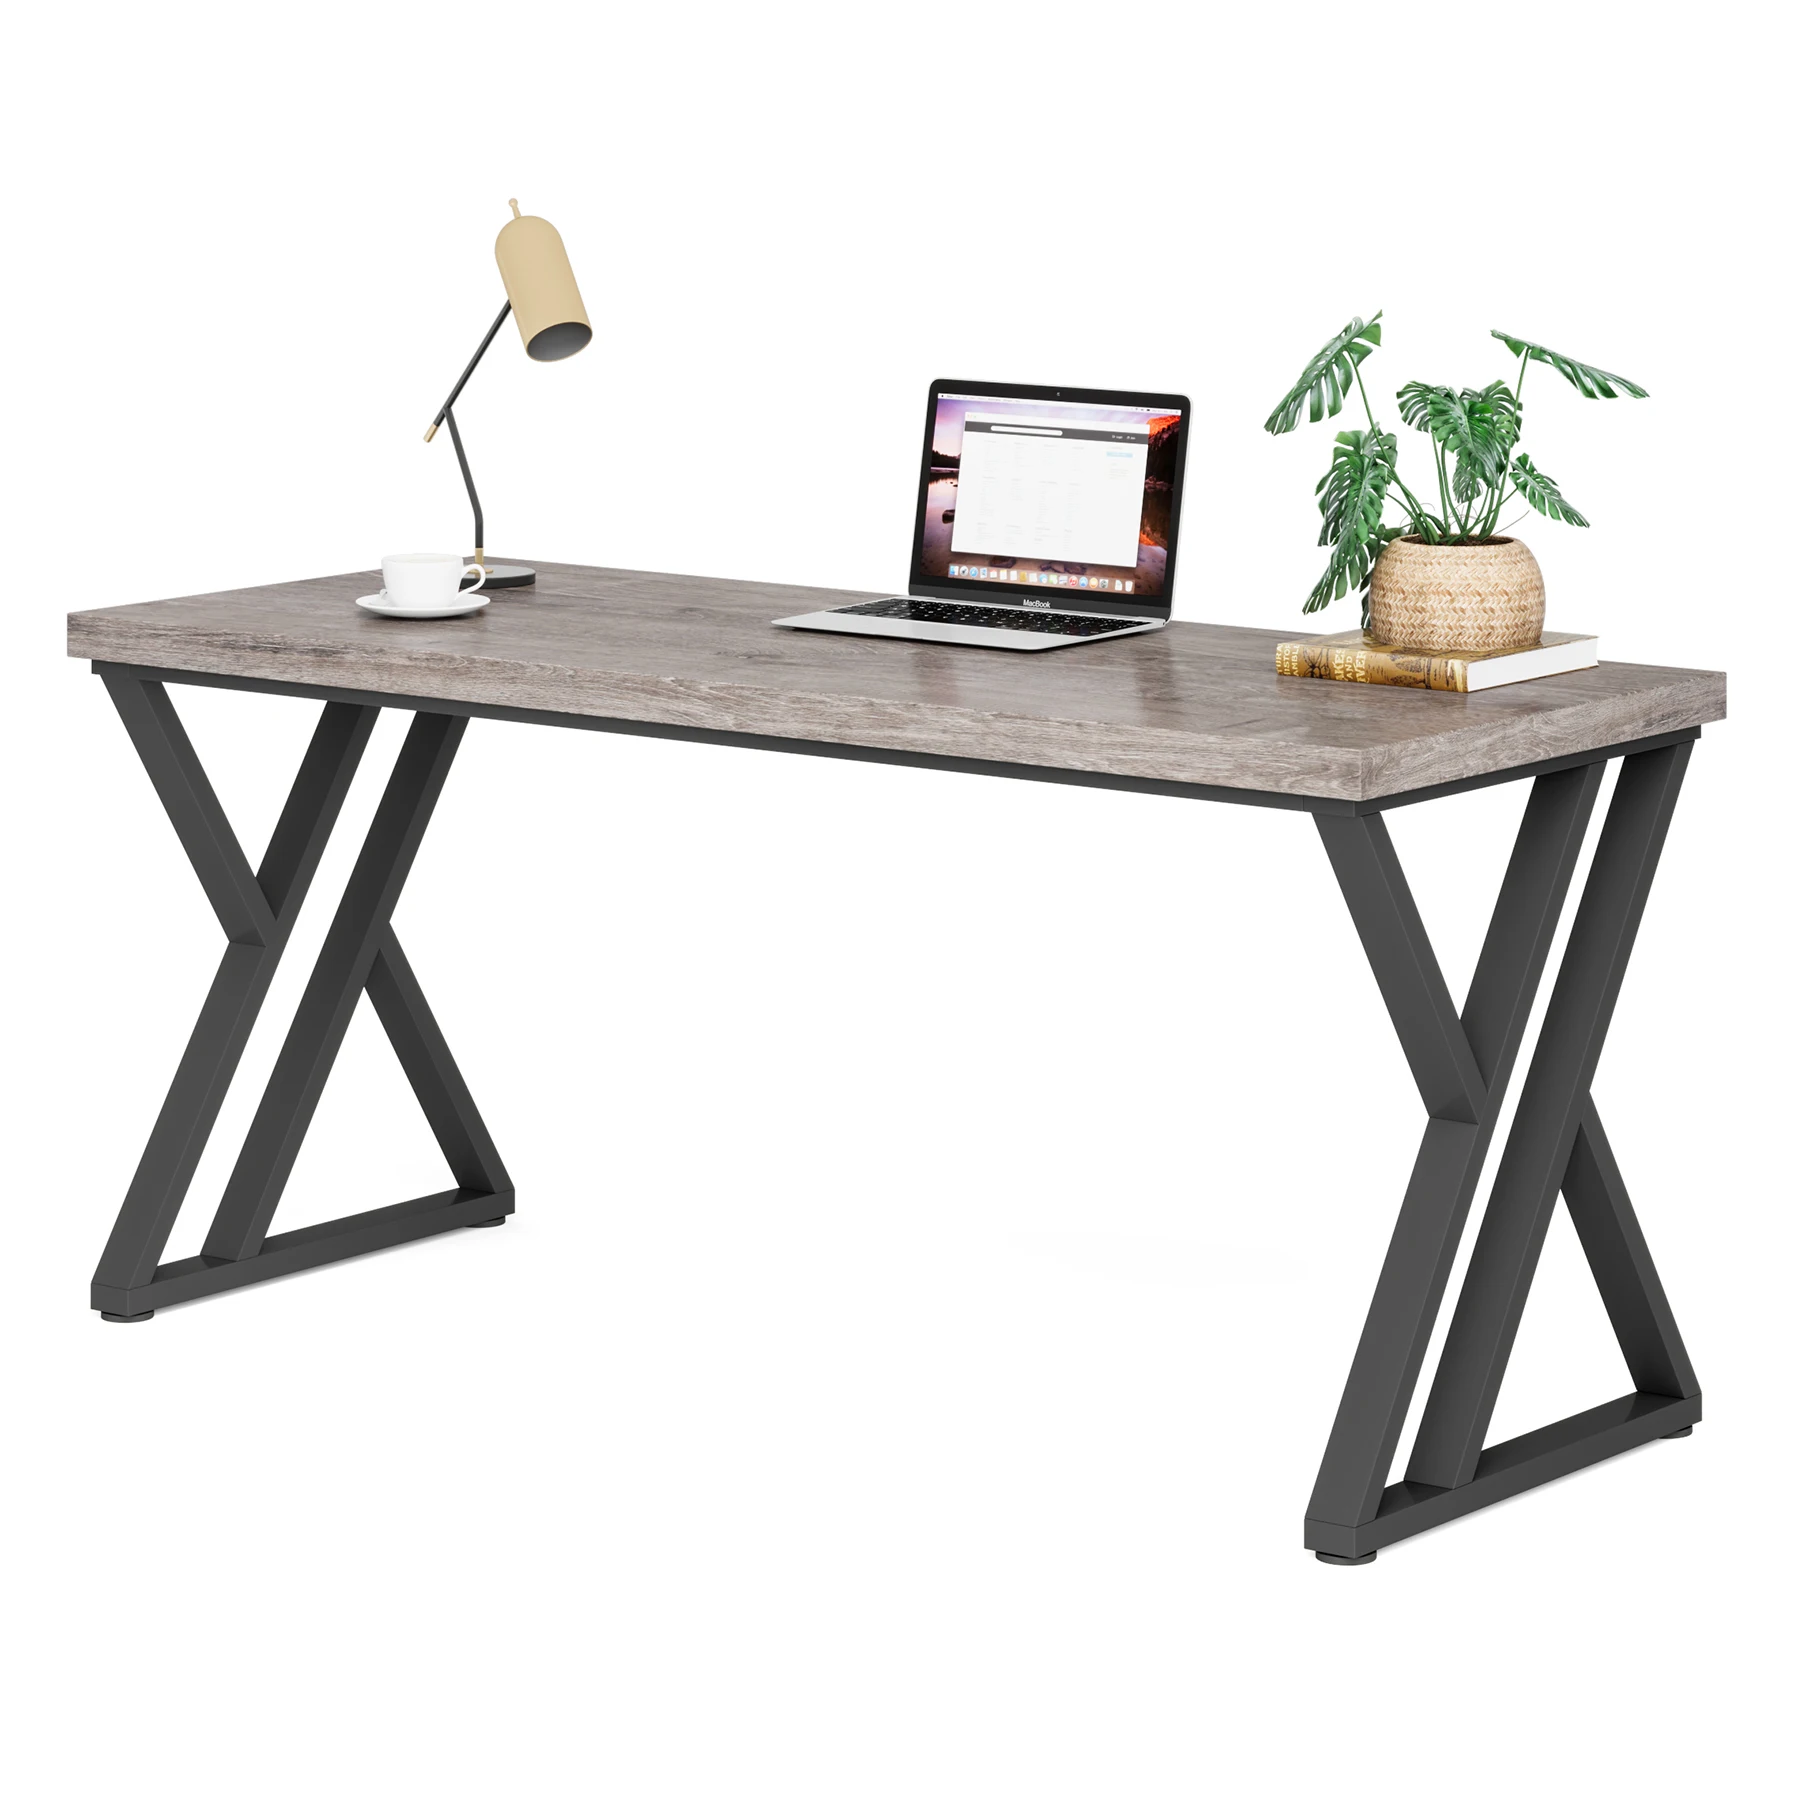 China Wholesale Price Furniture Table Executive Desk Table Stable Steady For Office Working